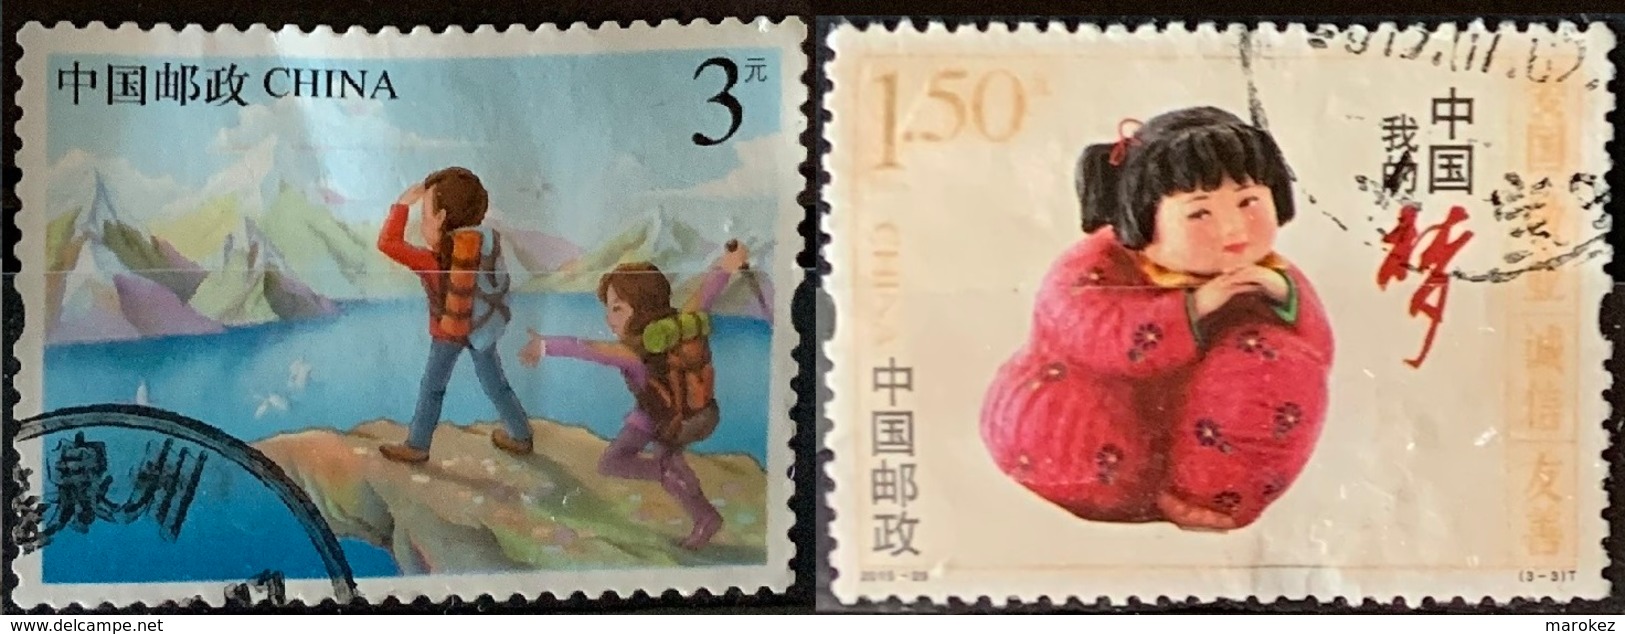 CHINA PRC 2015 Tourism & Nationalist Values 2 Postally Used Stamps MICHEL # 4677,4783 - Usados